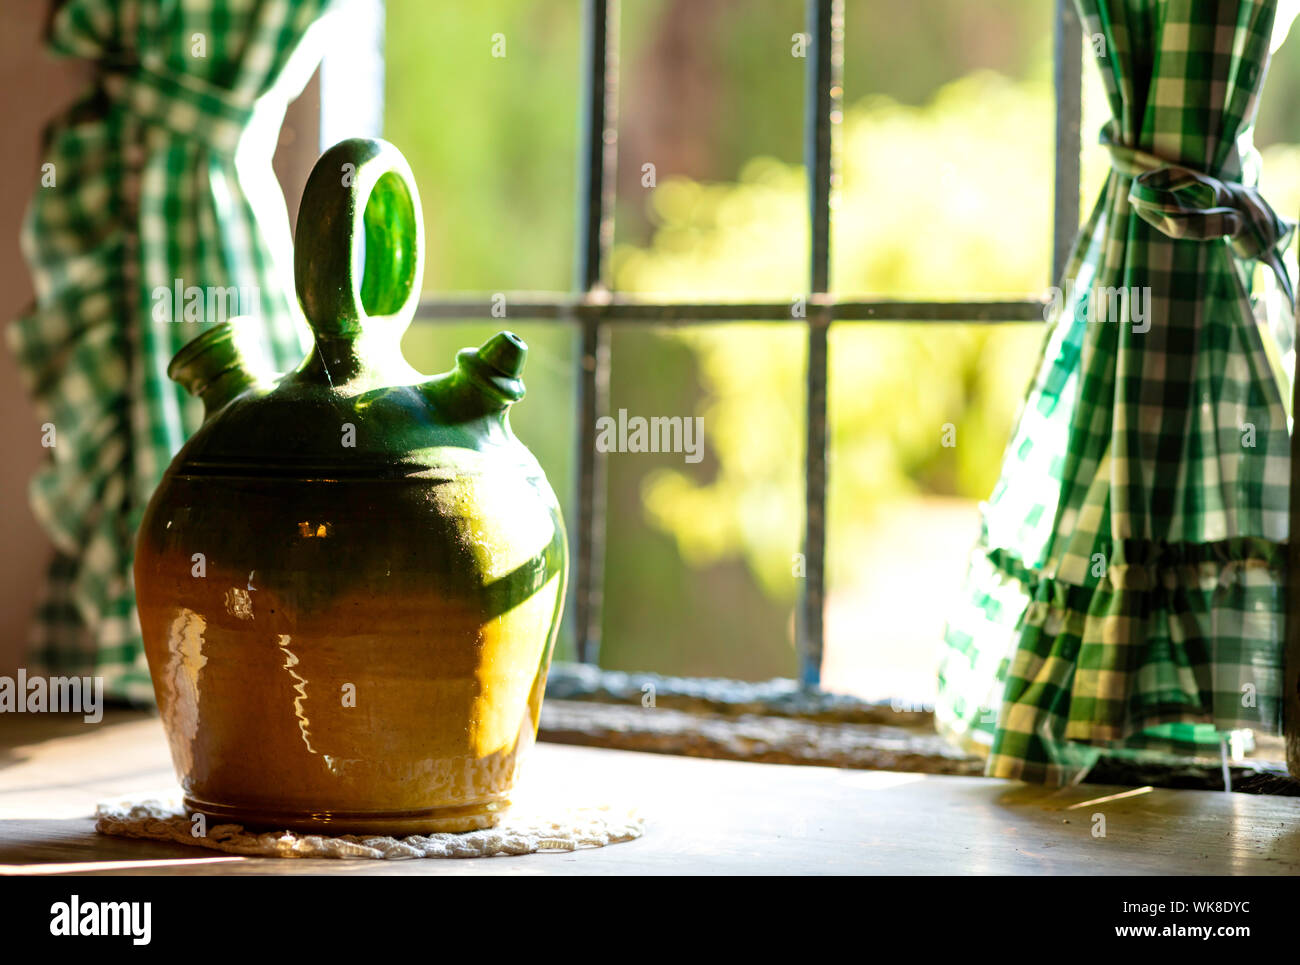 painted green bowl for drinking water on a wooden table, with a lattice window and green curtains, sunset light enters through the window Stock Photo